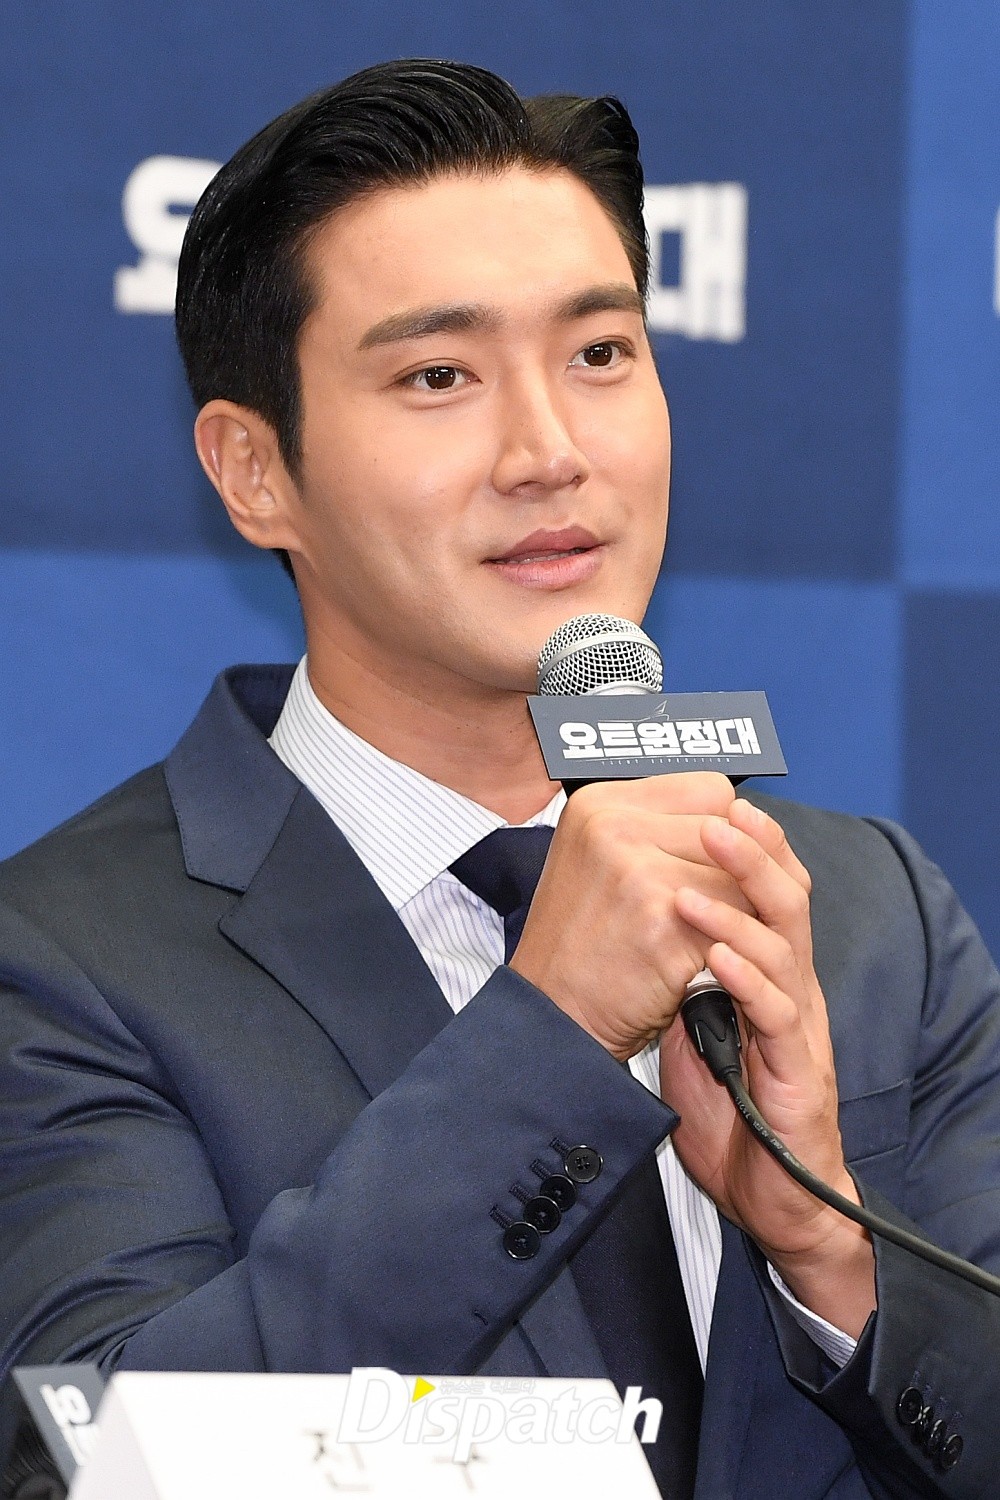 MBC Everlon Entertainment yacht Expedition production presentation was held at the Seoul Hotel in Sangam-dong, Seoul, on the afternoon of the 12th.Choi Siwon completed the dandy fashion in a suit on the day, with a gentle smile and photo time with reporters.Meanwhile, yacht expedition is a documentary entertainment program that shows the process of four men who dreamed of adventure challenging the Pacific voyage on yacht.The first broadcast on the 17th.youngest crew membera cheerful smilevisuals received by SeaMeet me on TV.